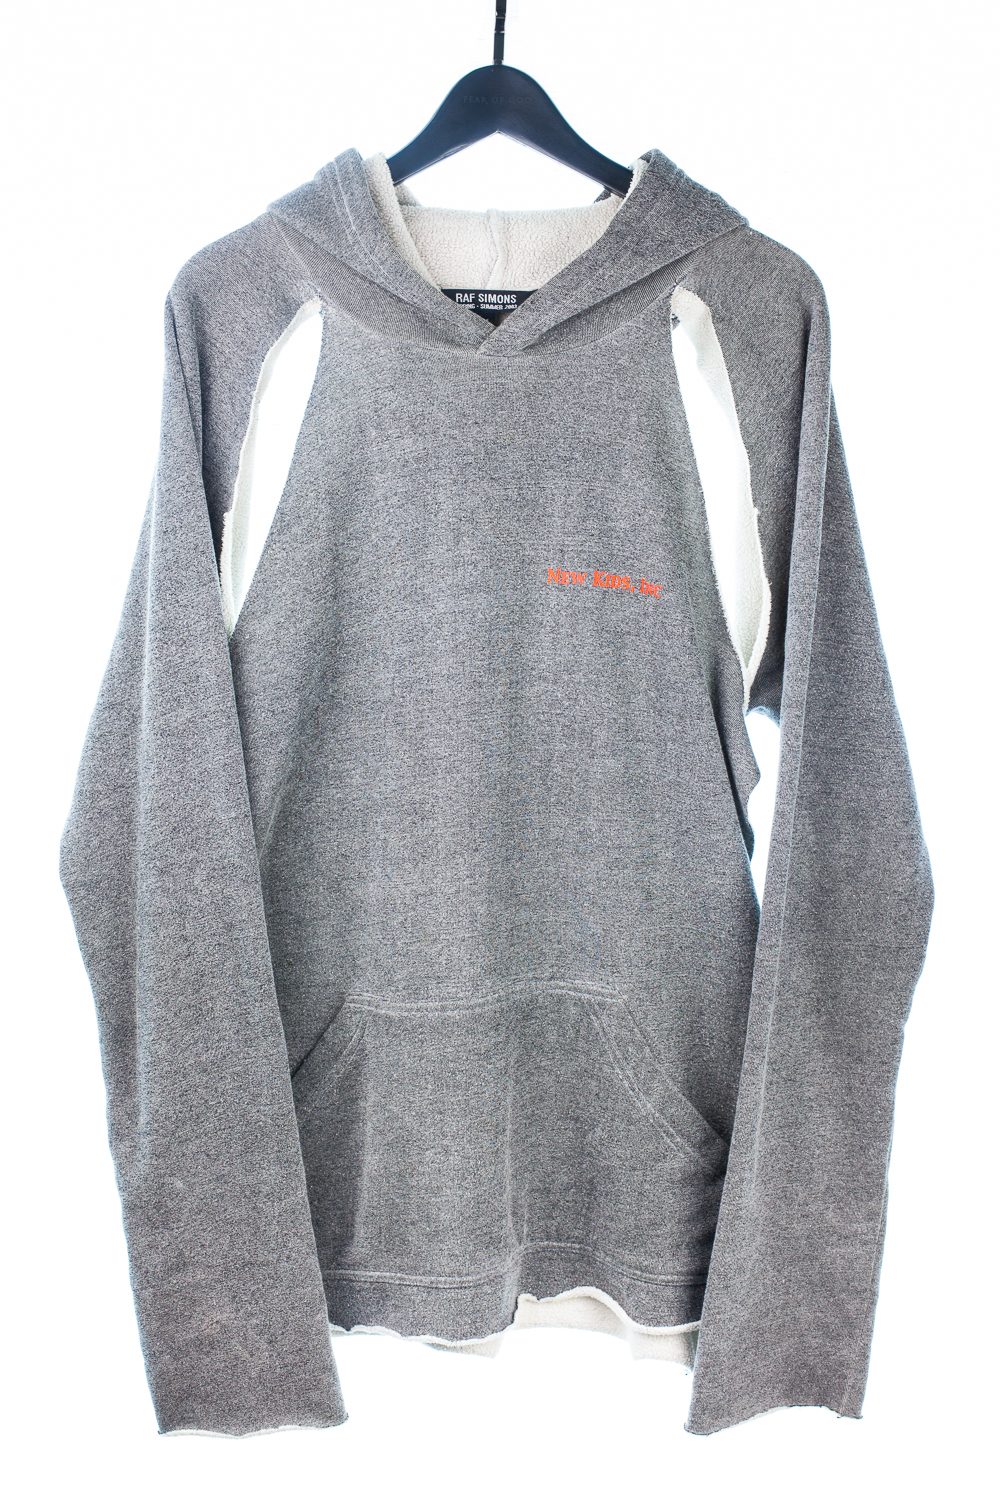 SS03 “Consumed” Grey Cutout Hooded Sweater